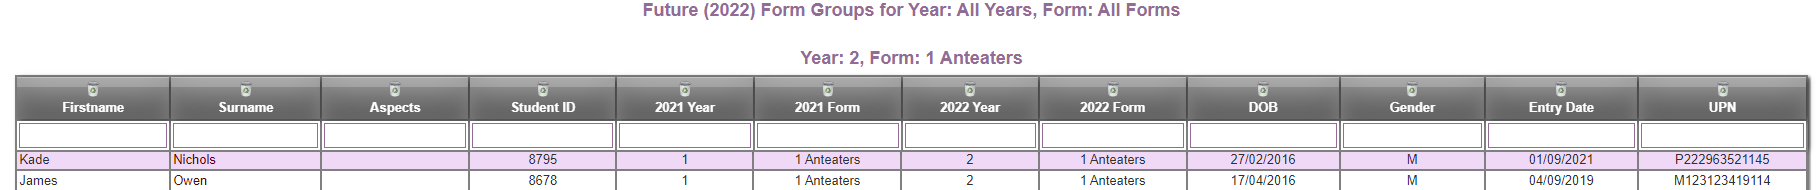 future form groups.png